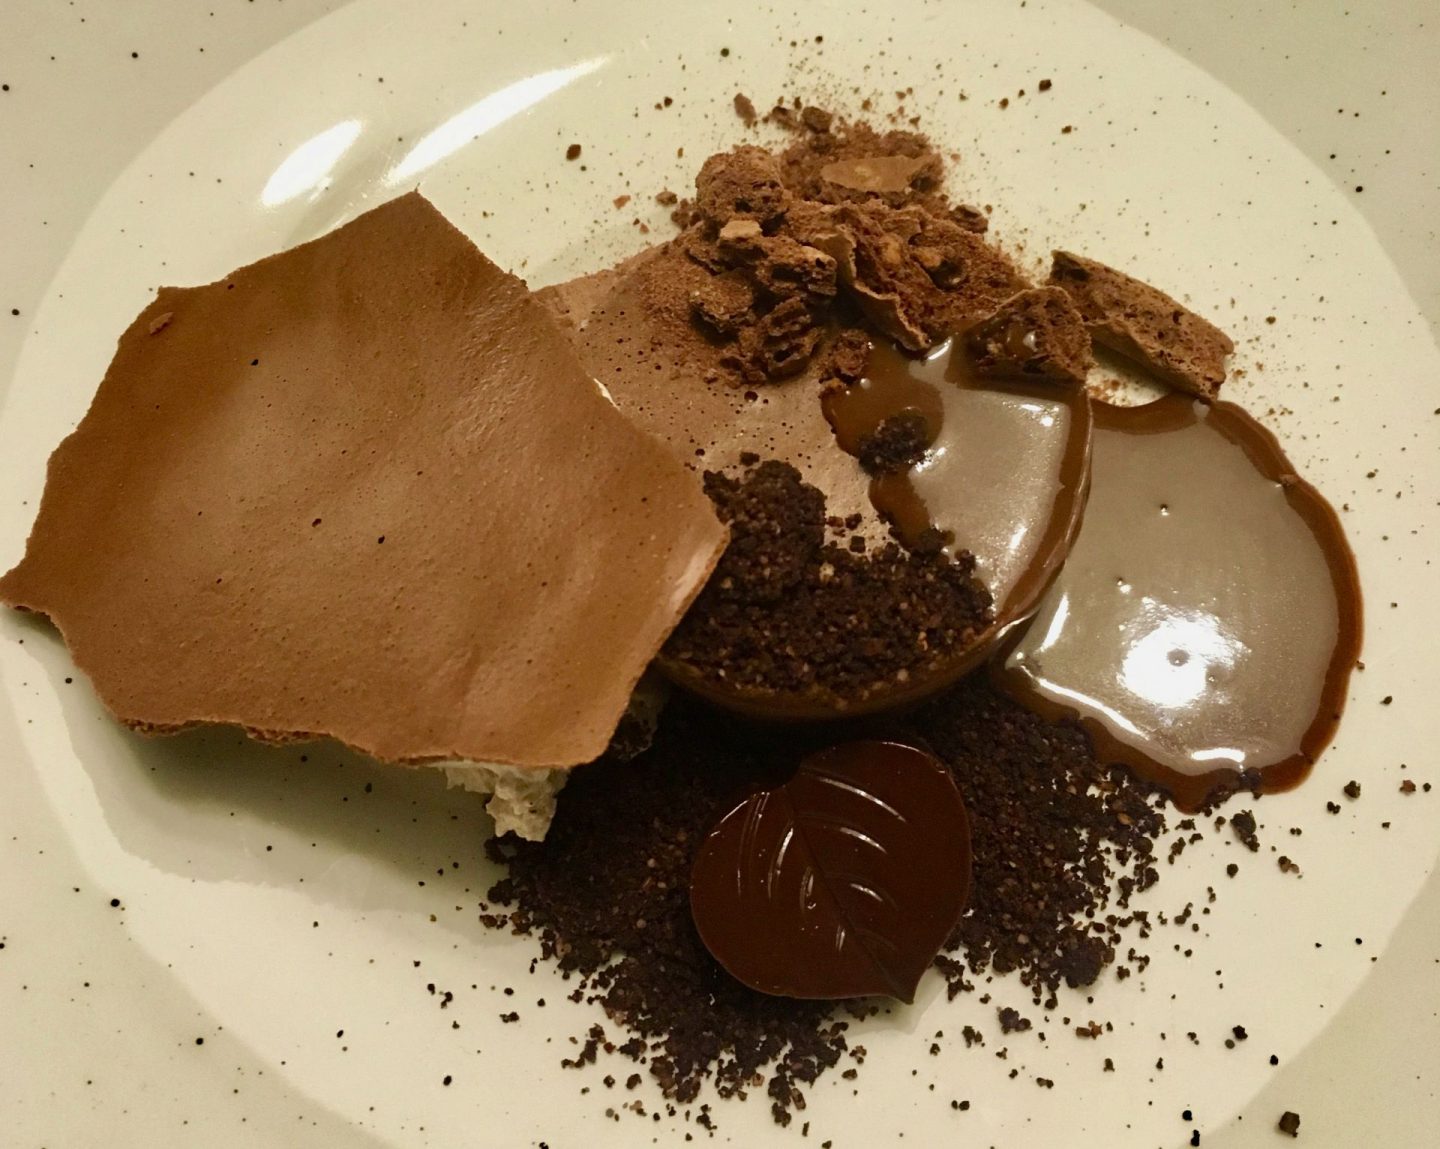 A close up of a chocolate dessert showing different textures of chocolate, eaten at Baracca in Cluj